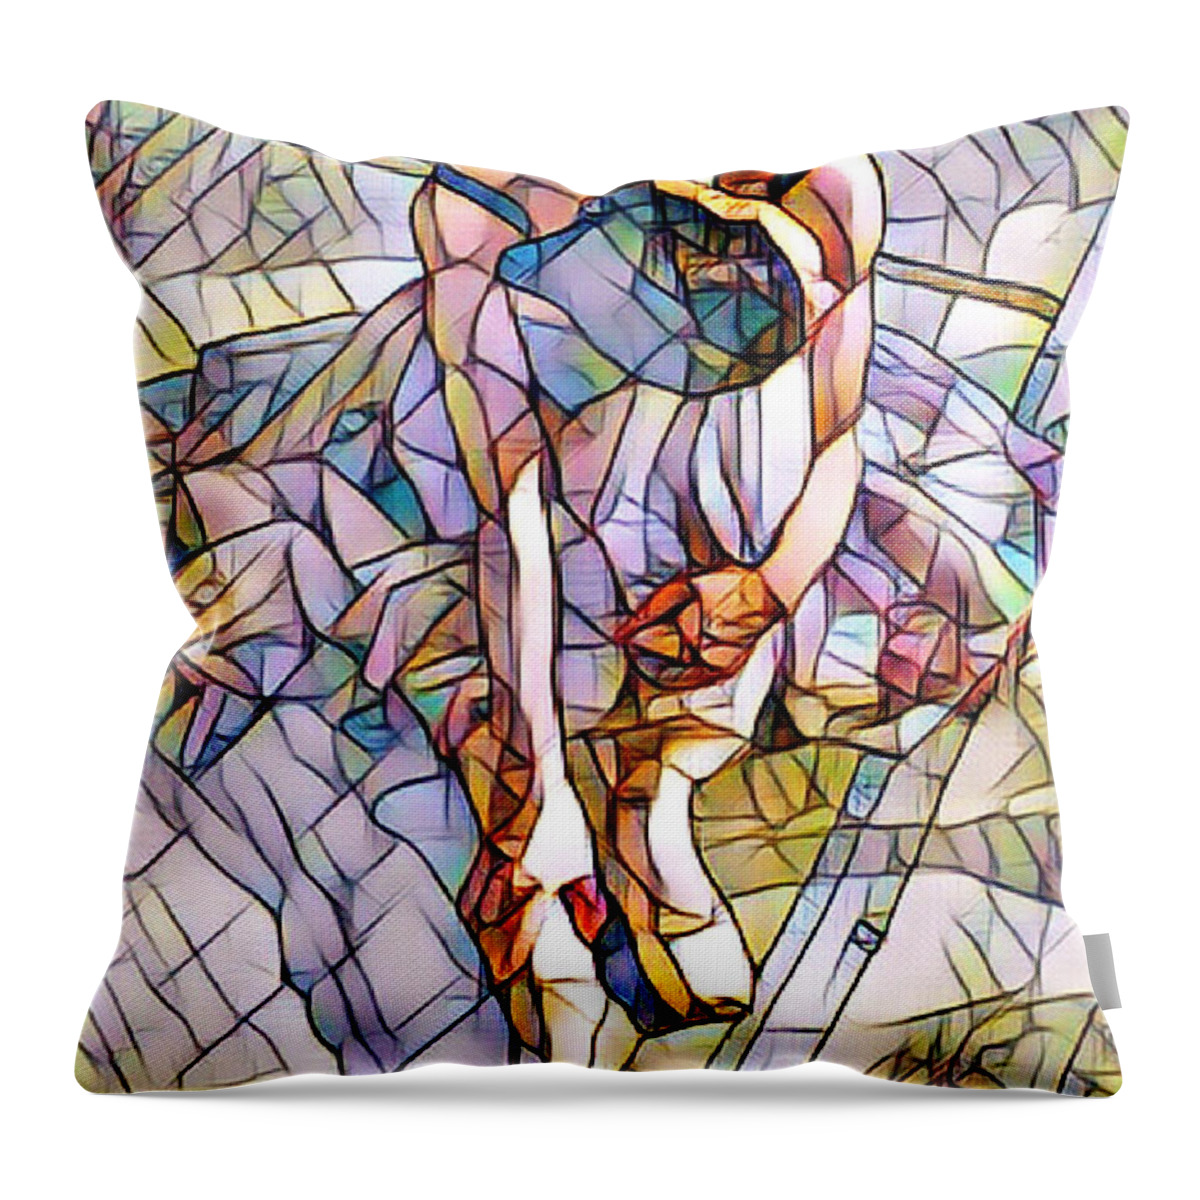 Fineartamerica Throw Pillow featuring the digital art Mosaic Portret ballet by Yvonne Padmos